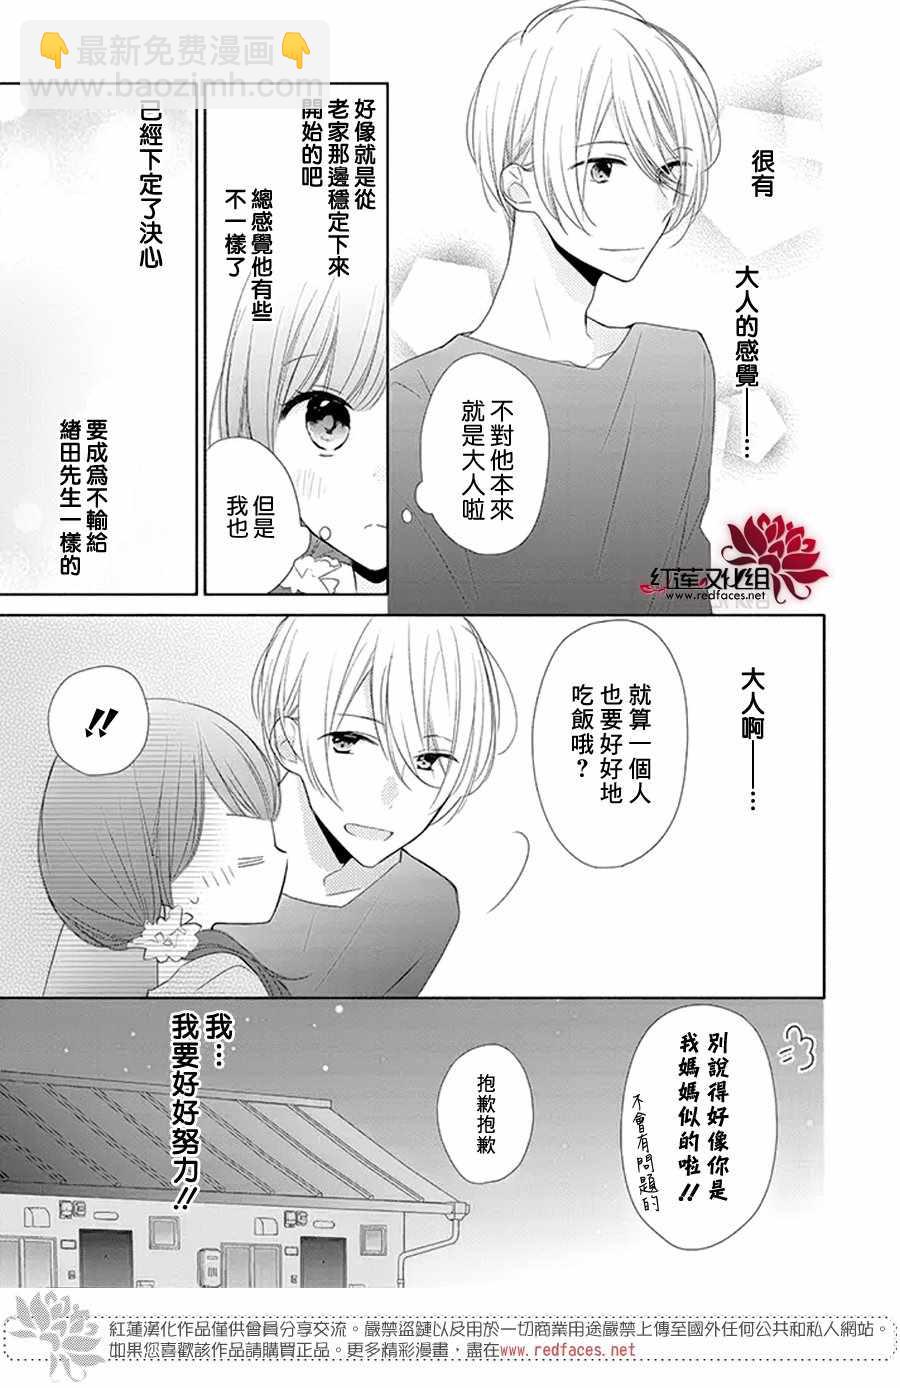 If given a second chance - 15話 - 5